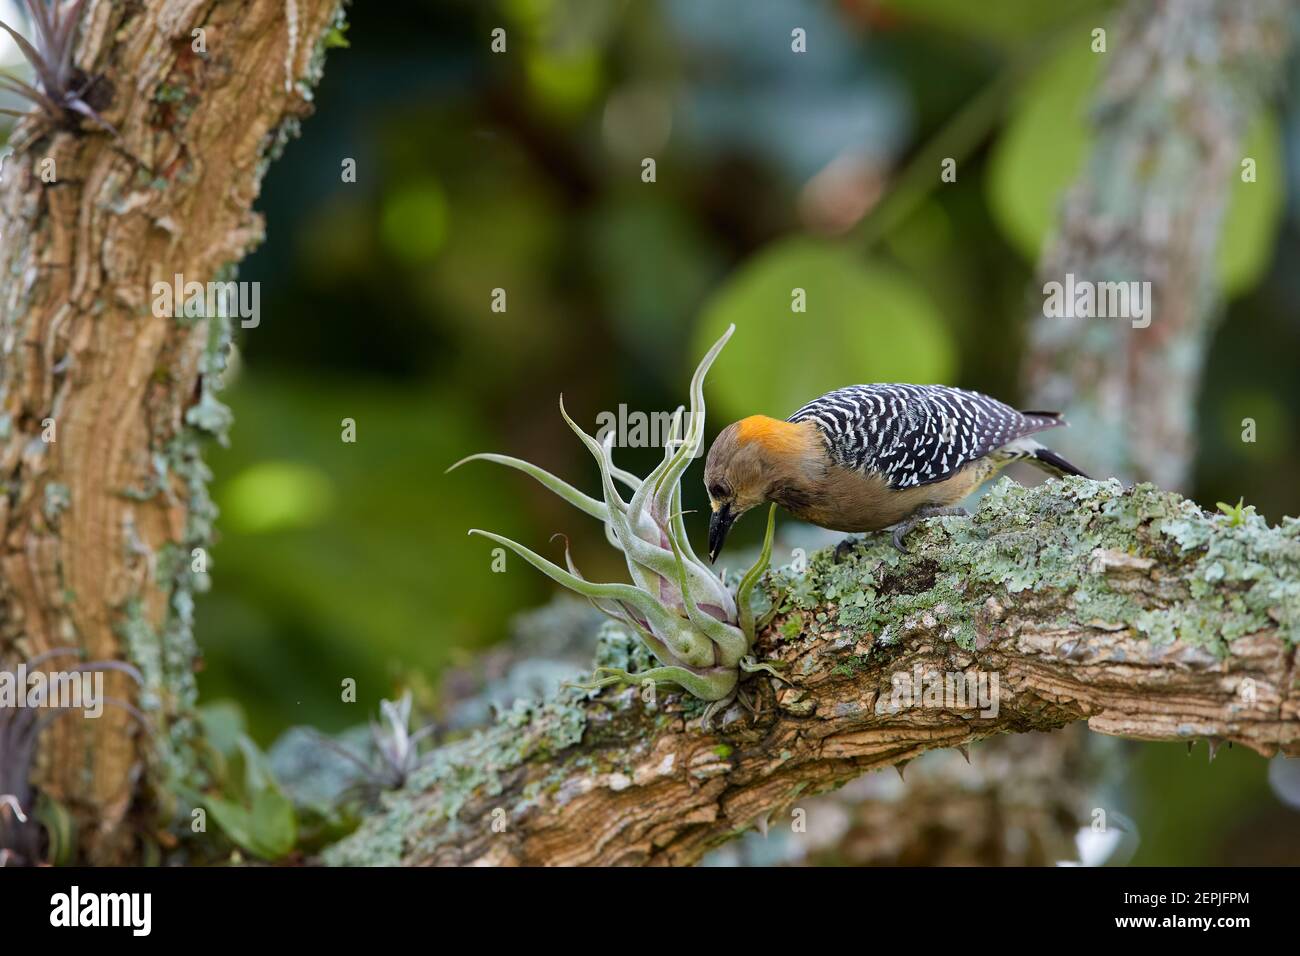 Hoffmann's woodpecker, Melanerpes hoffmannii, tropical woodpecker with barred back and wings, looking for insects among epiphytes on tropical, old tre Stock Photo